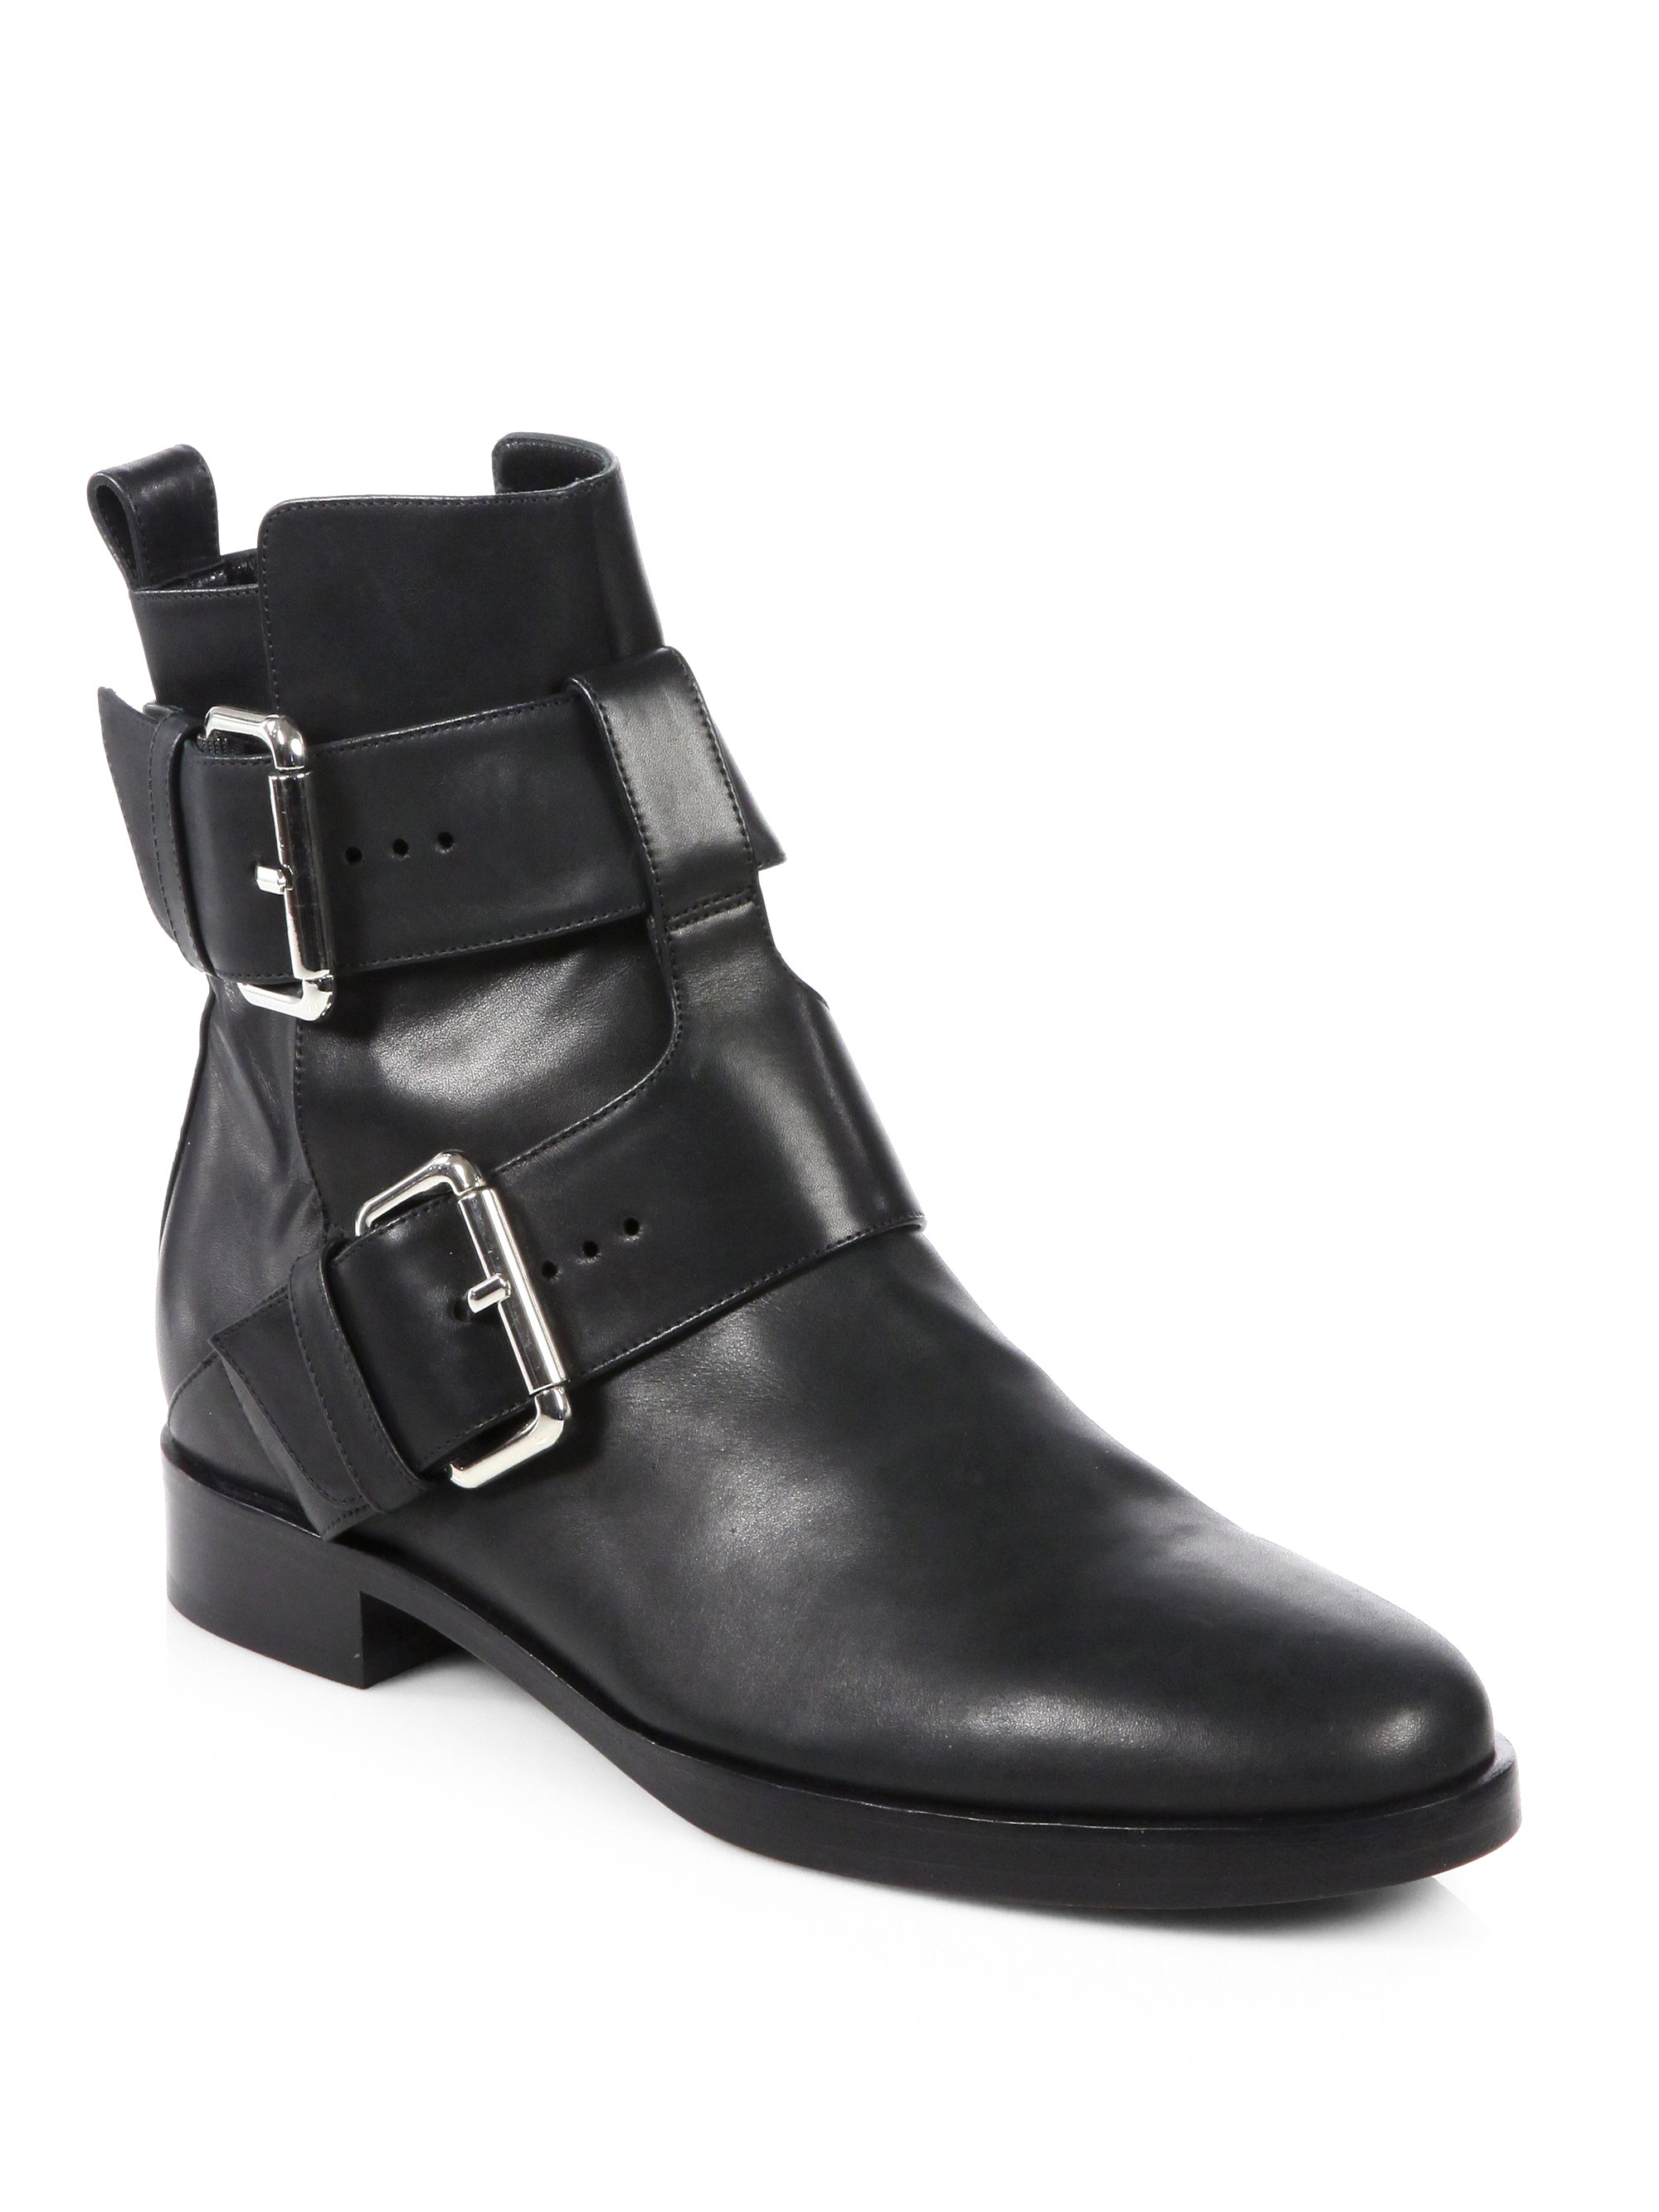 Pierre Hardy Leather Double Buckle Motorcycle Boots in Black | Lyst